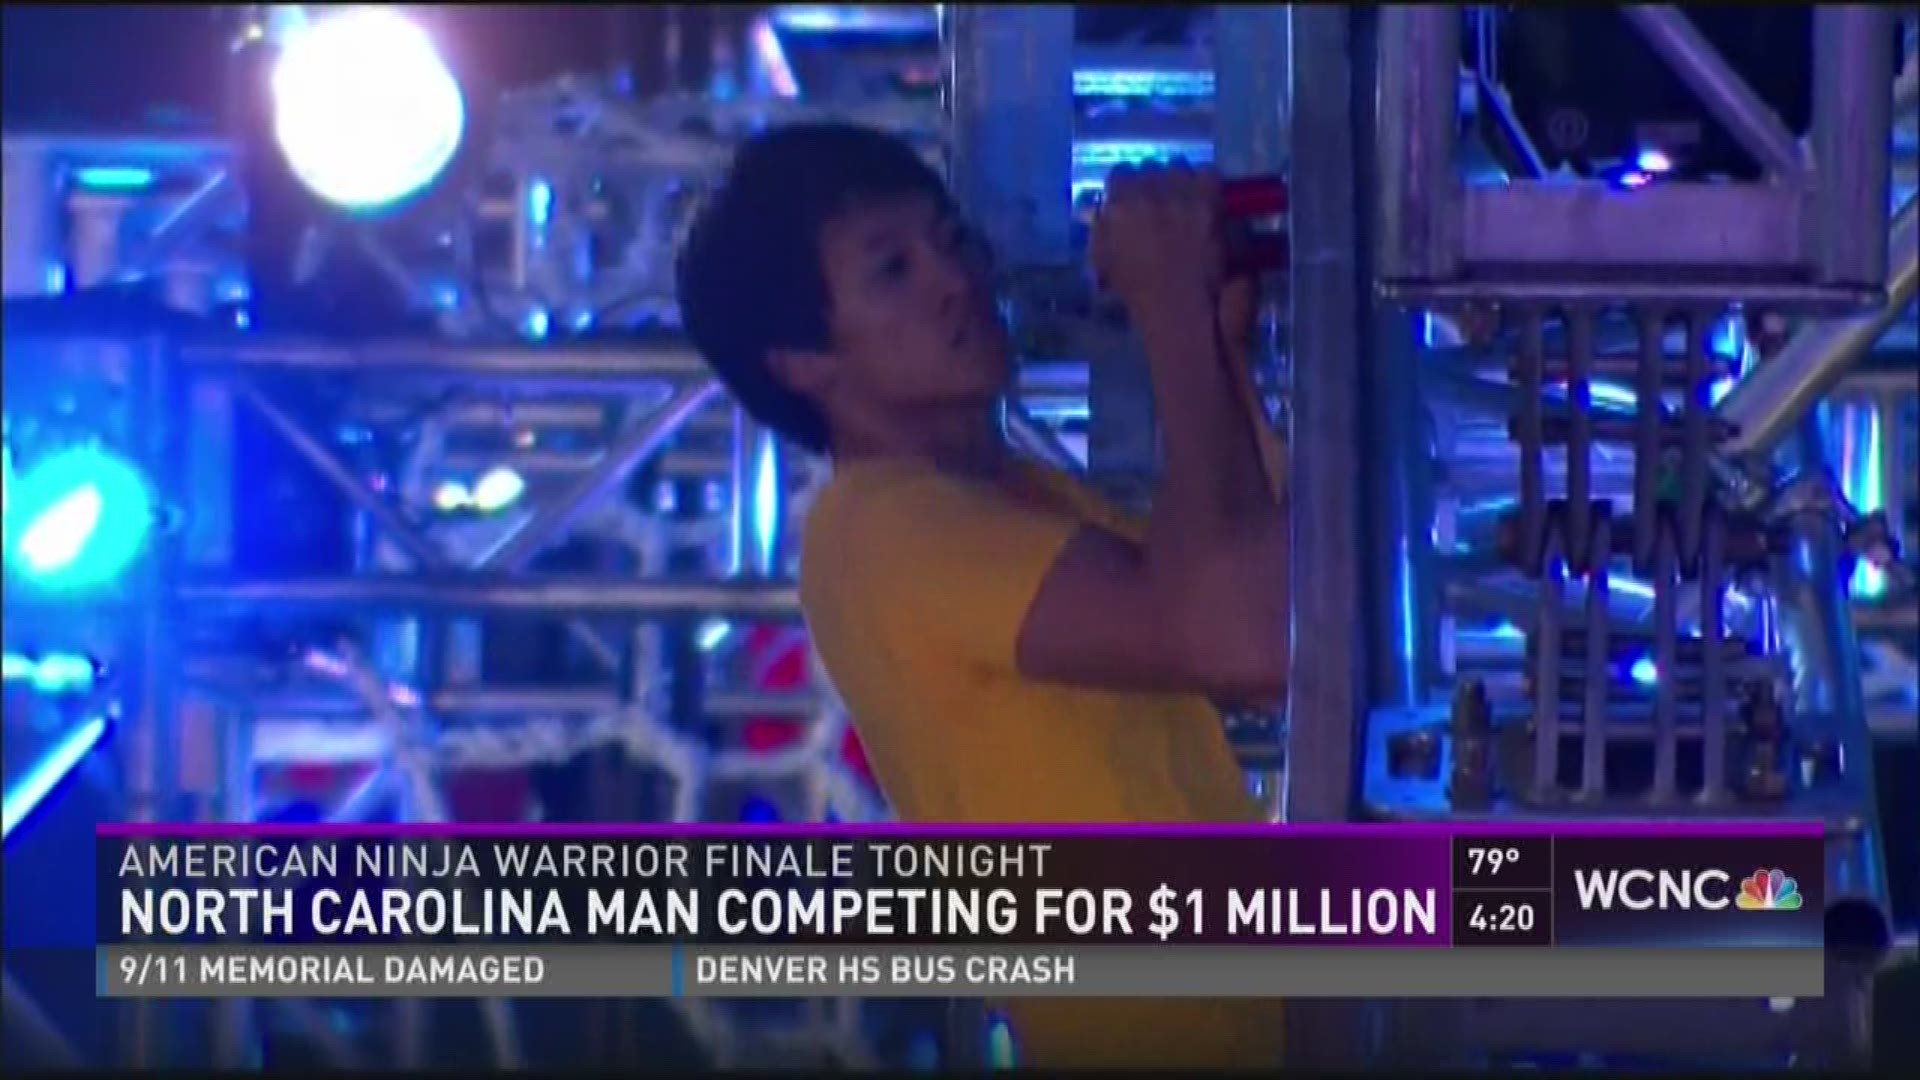 A North Carolina man is competing for $1 million in Monday night's 'American Ninja Warrior' finale.